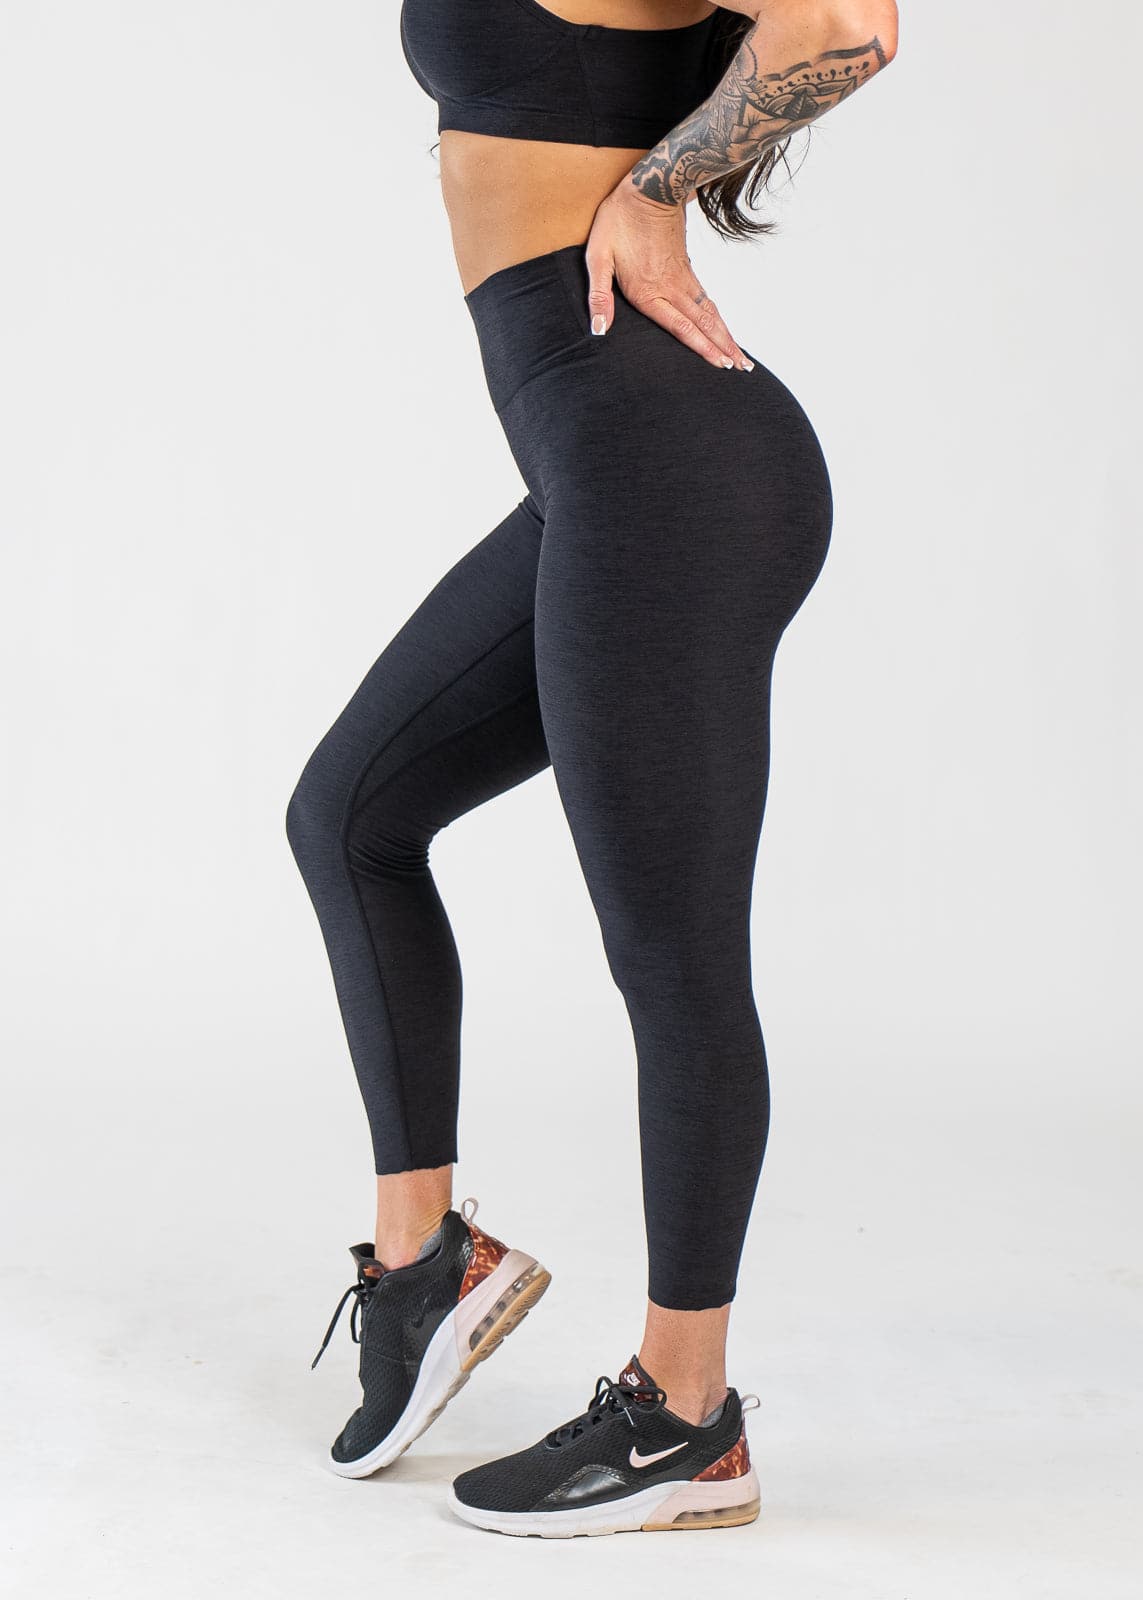 Chest Down Side View With One Hand on Lower Back Wearing Dream Leggings | Black